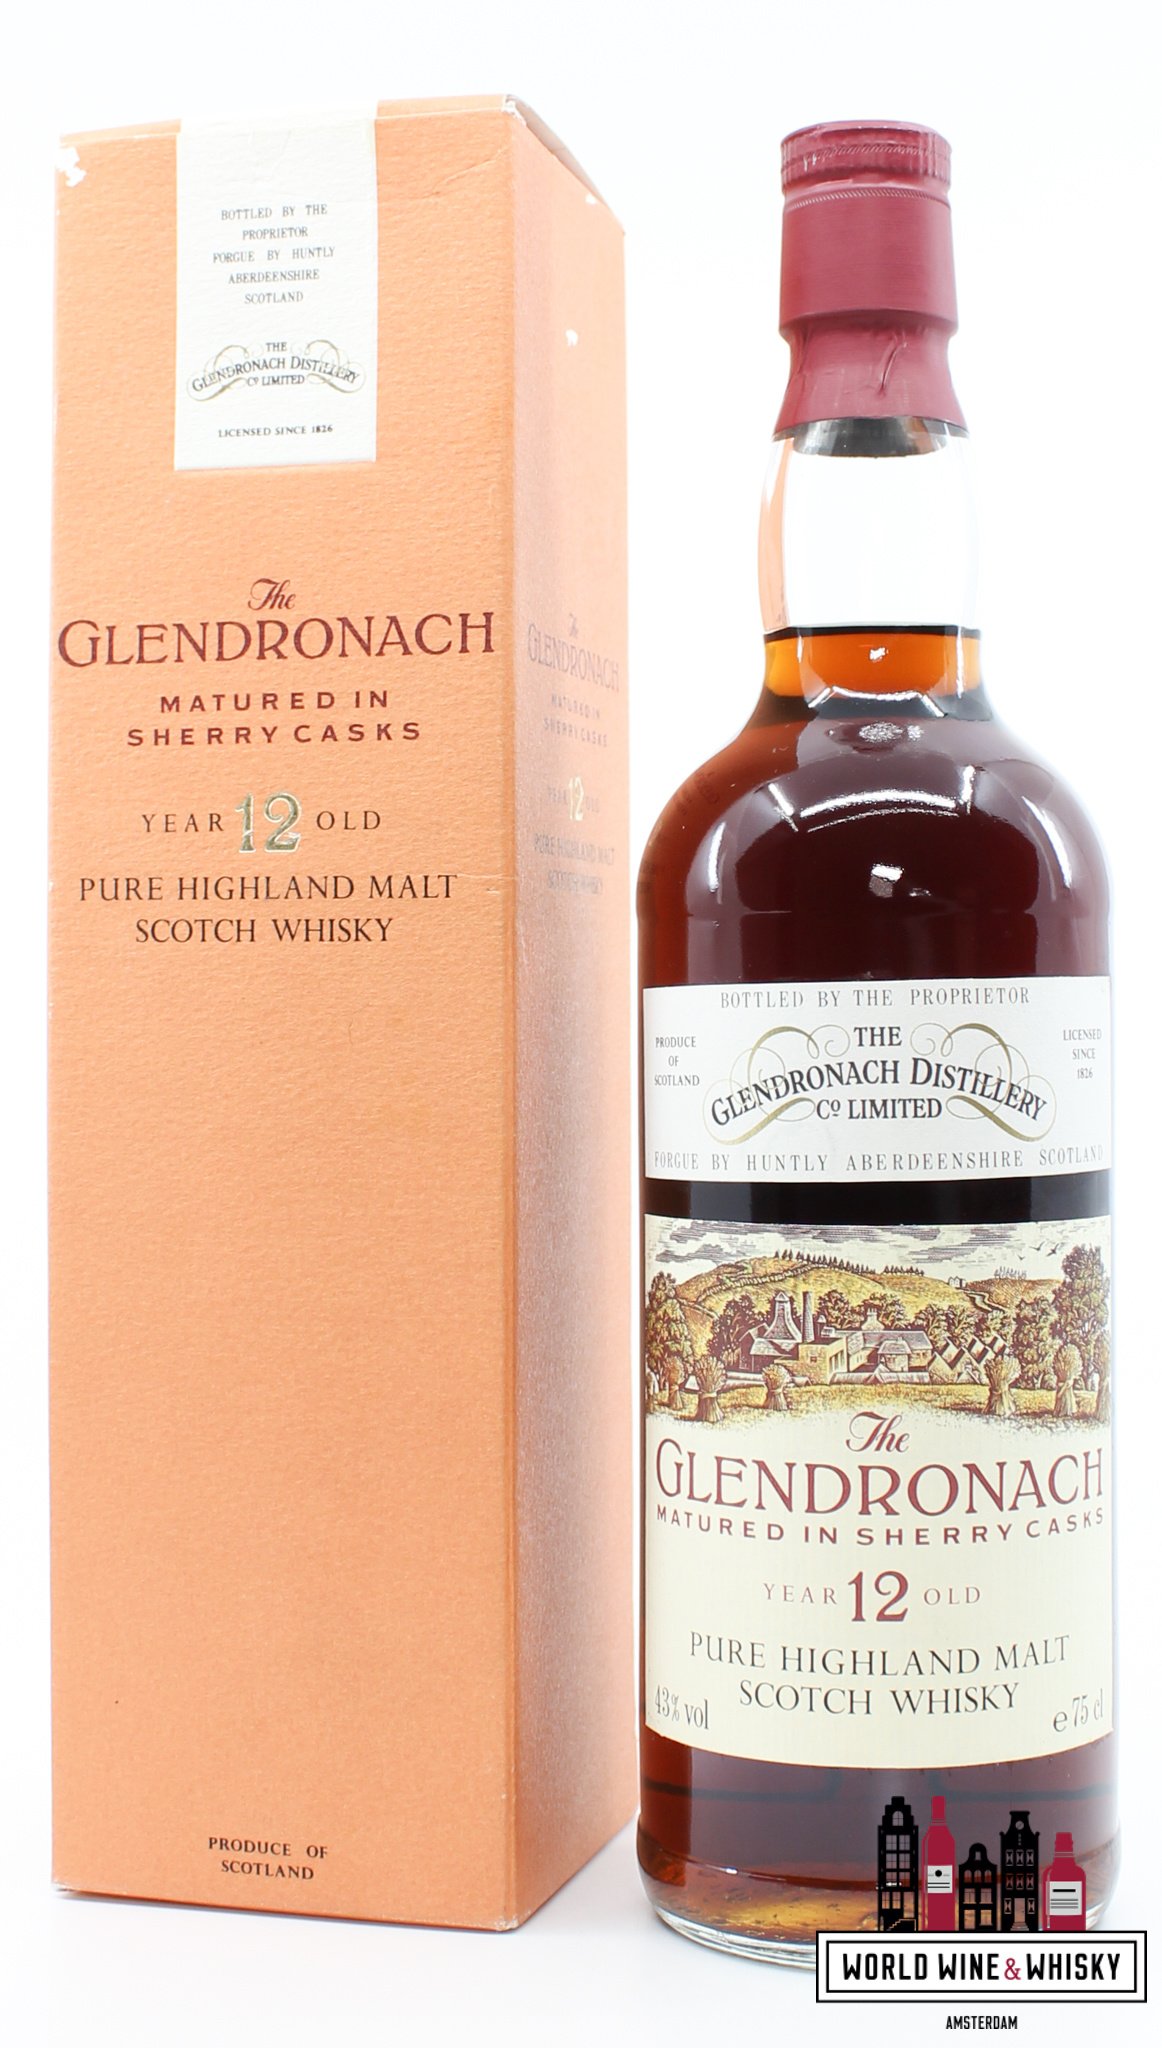 Glendronach Glendronach 12 Years Old - Matured in Sherry Casks - 80s Bottling 43% 750ml